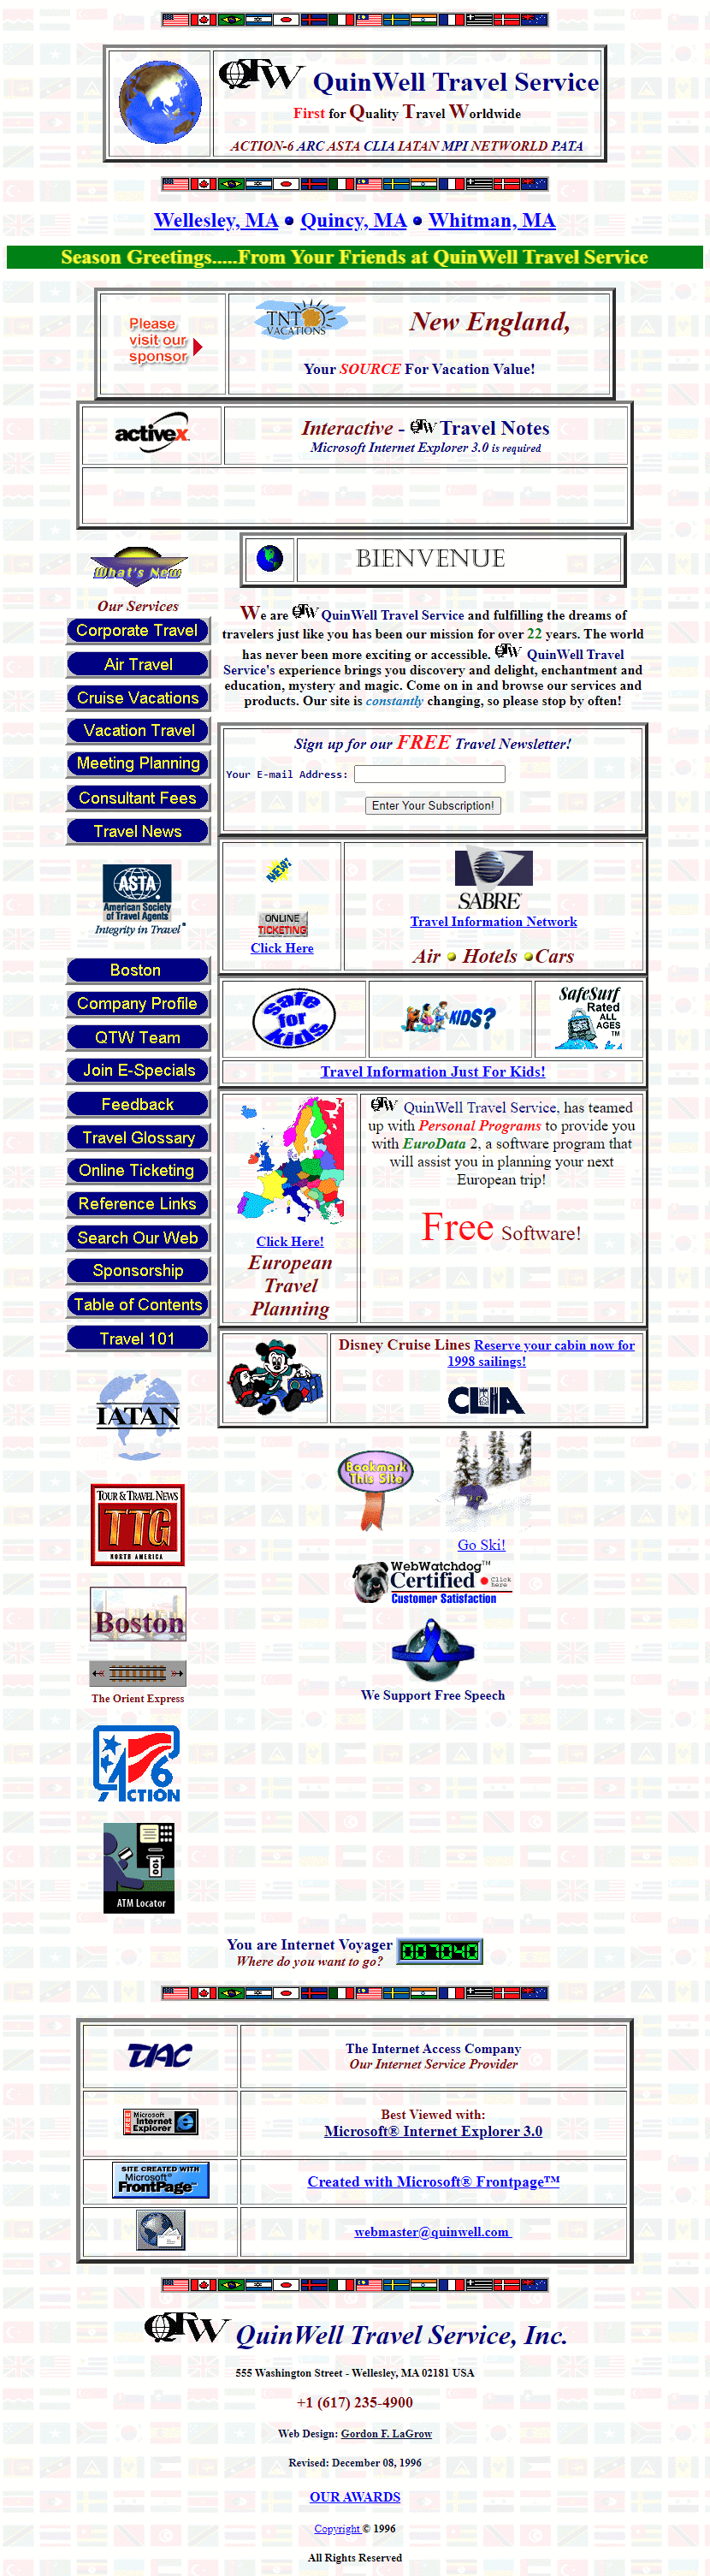 QuinWell Travel Service website in 1996